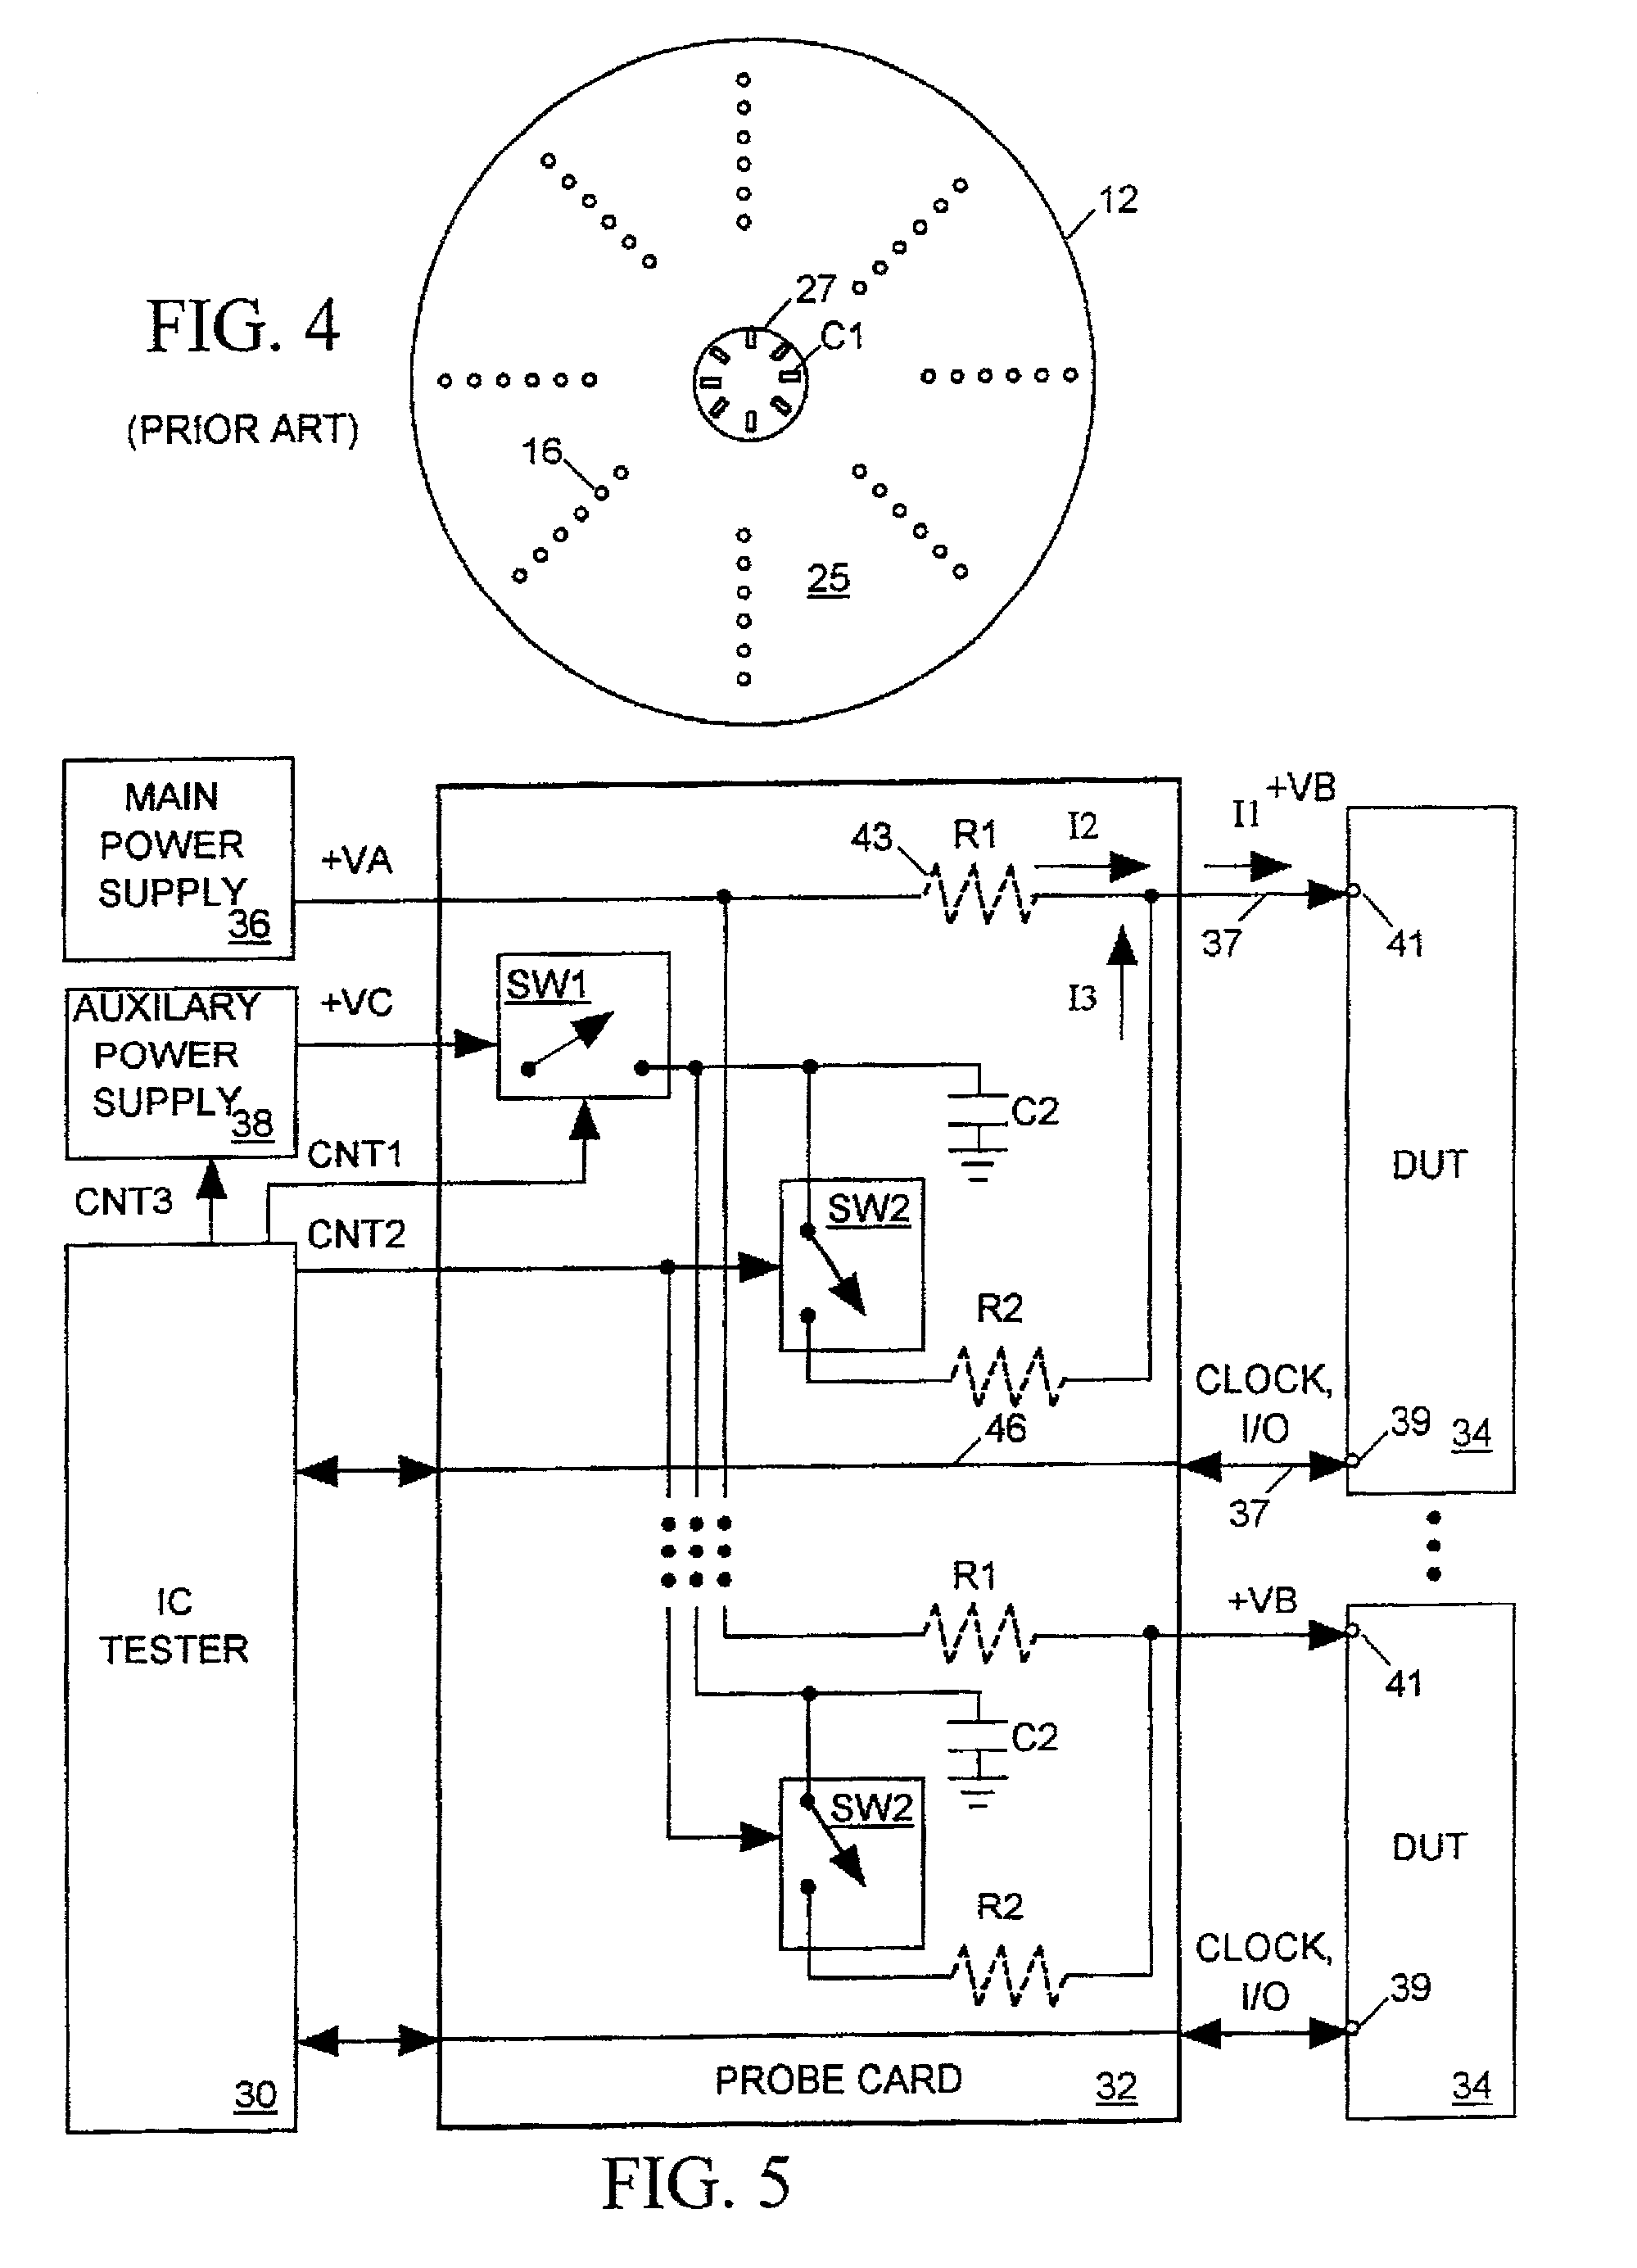 Apparatus for reducing power supply noise in an integrated circuit